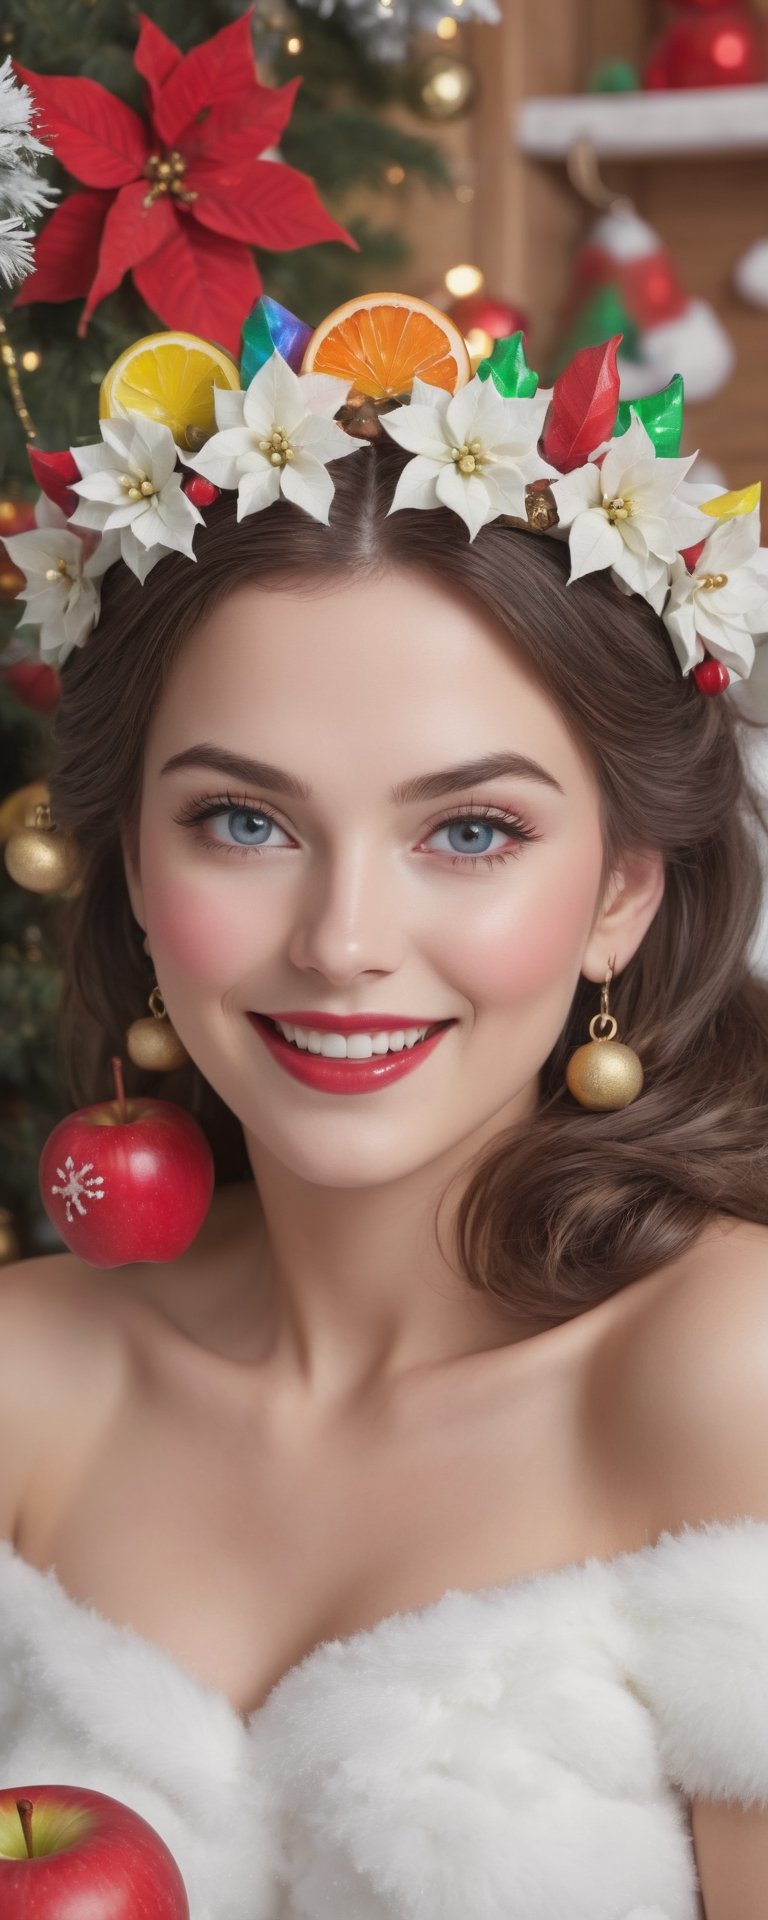 (best quality, masterpiece, ultra detailed, highres, 8k, RAW image),
a beautiful snow white, with an apple, rainbow scenary of a candy world in Christmas, eye contact  laughing, lipgloss,  poinsettia wreath, christmas tree with bells and apples, bliss, vibrant colors, 